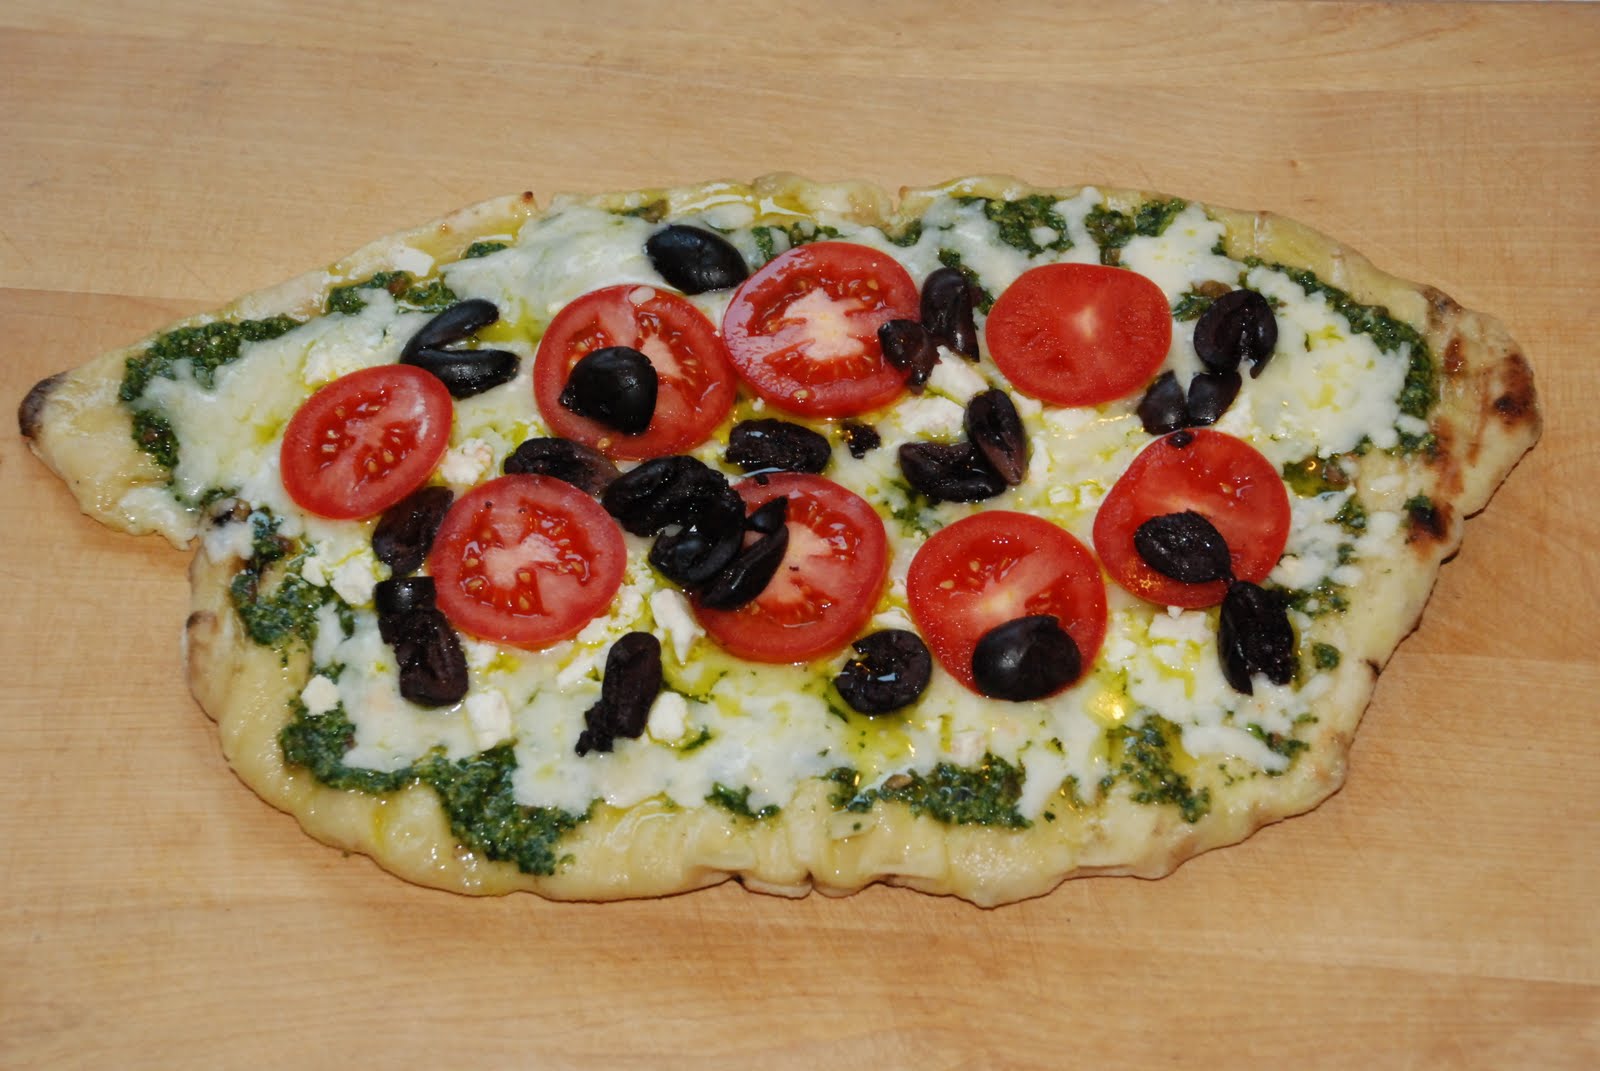 Culinary Encounters: Grilled Mediterranean Pizza